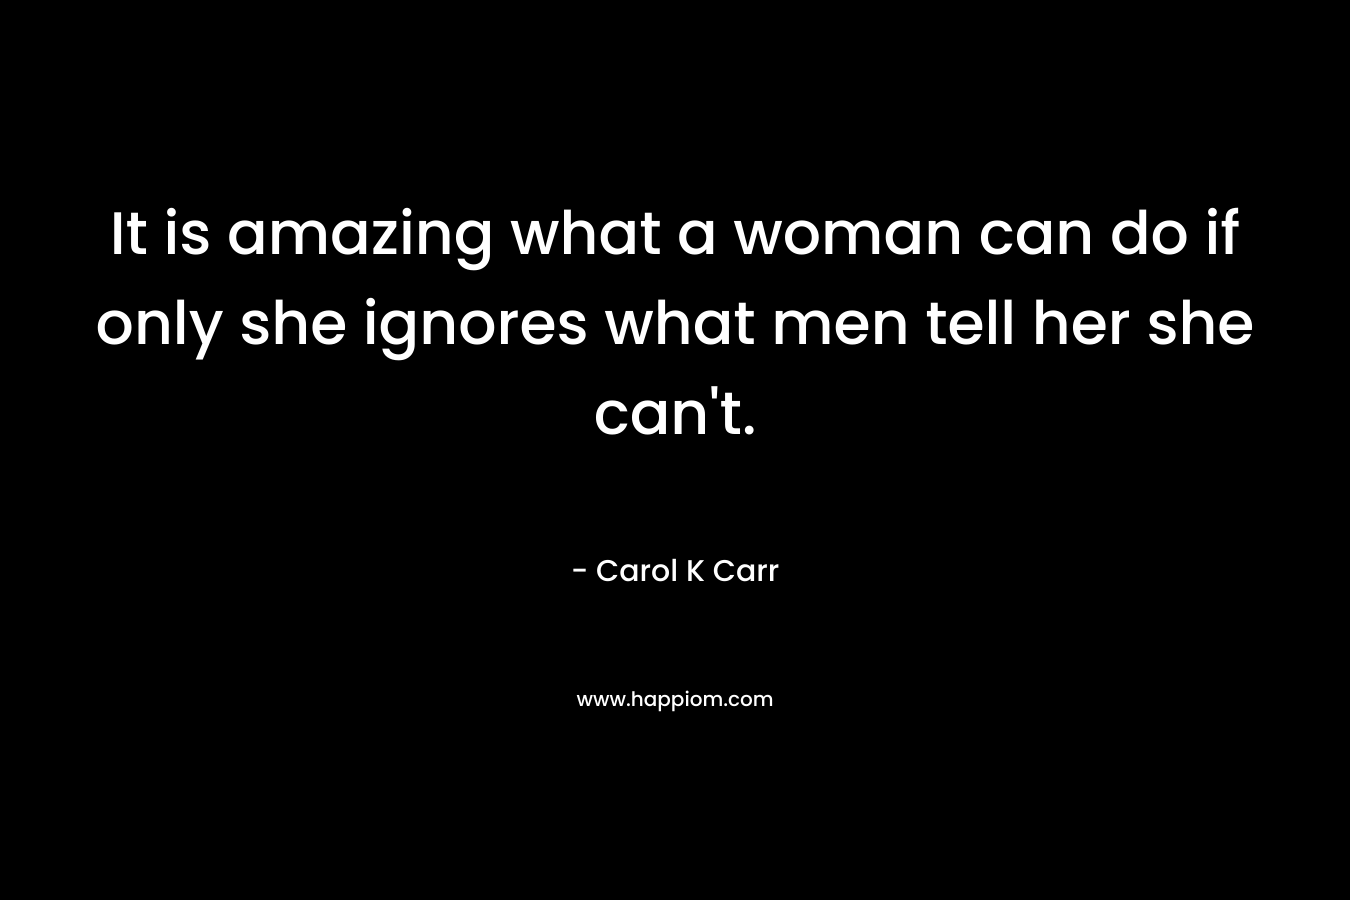 It is amazing what a woman can do if only she ignores what men tell her she can’t. – Carol K Carr